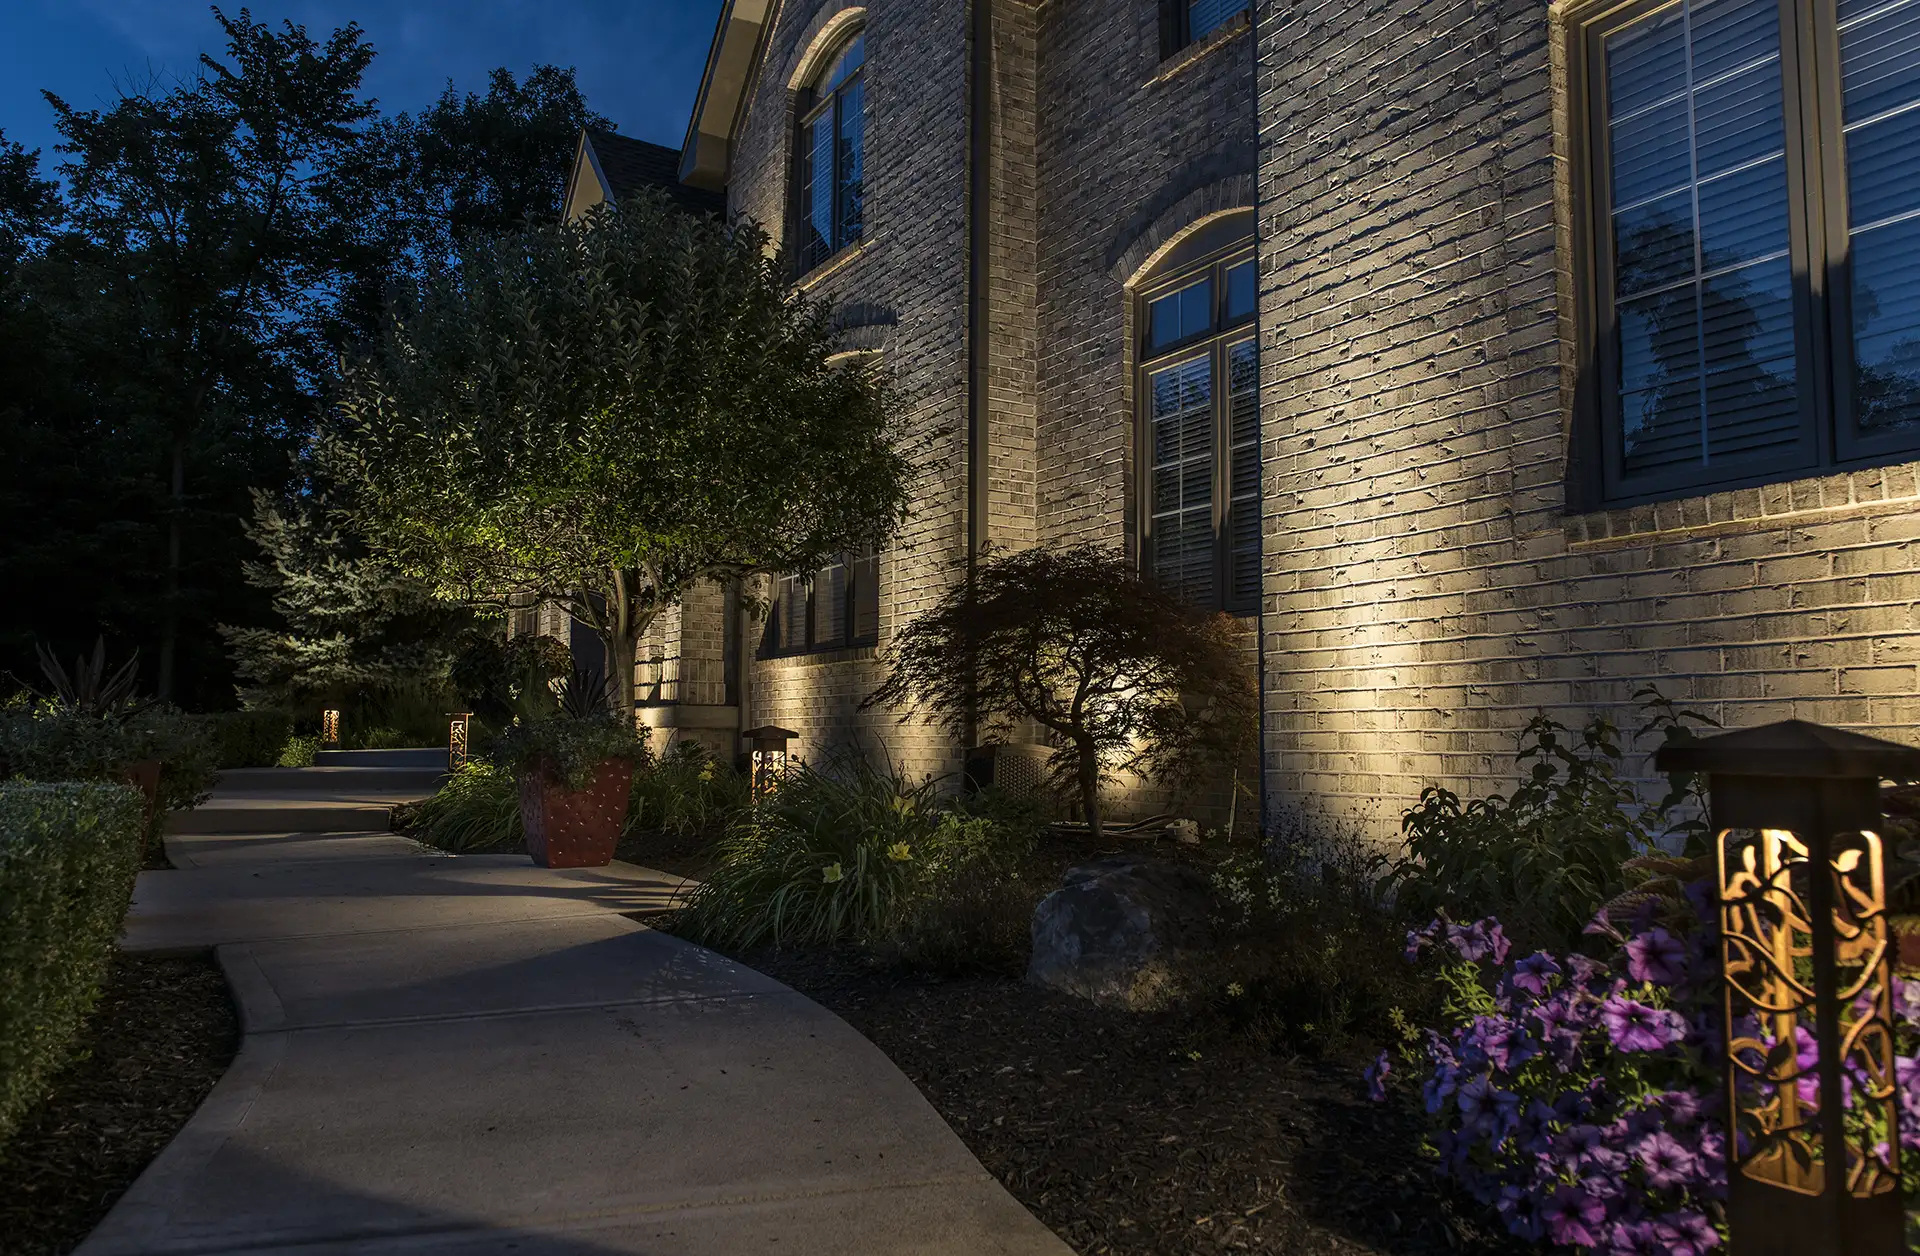 Fuson residence image 1 4x4 bollard light front entrance path Lighthouse Outdoor Lighting and Audio Delaware